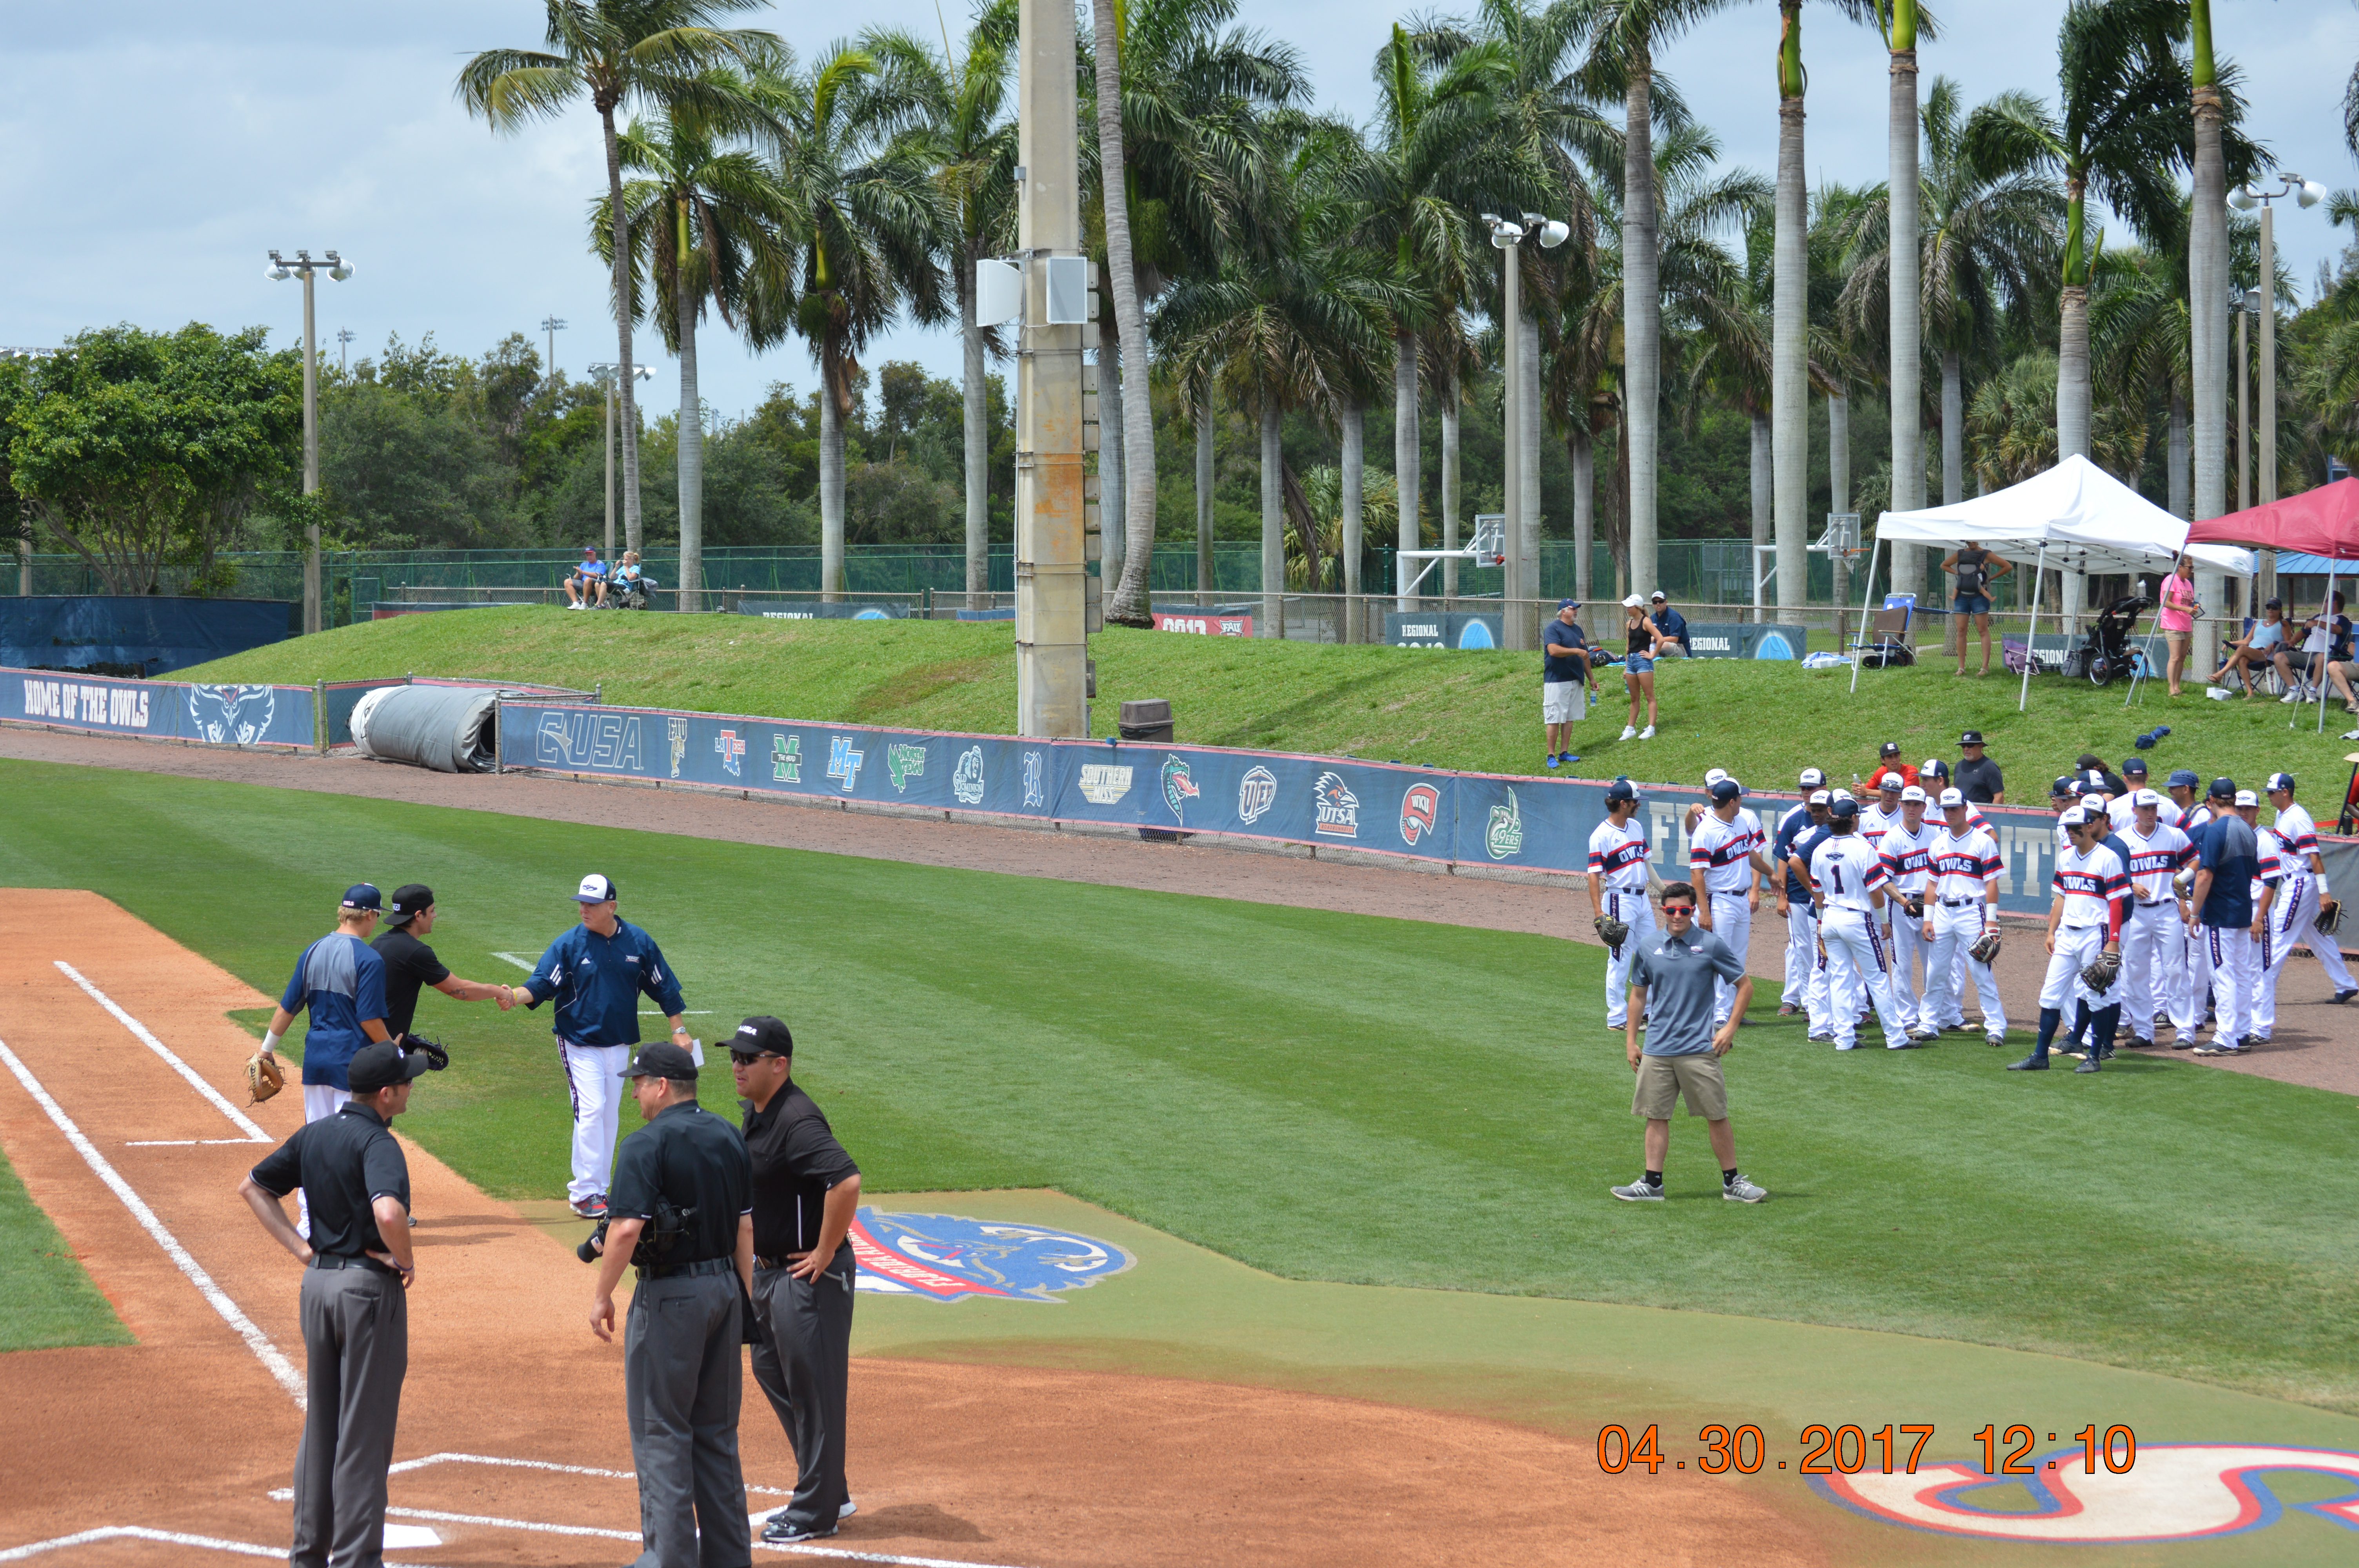 RECO Intensive Outpatient Program Founder David Niknafs Throws First Pitch at FAU